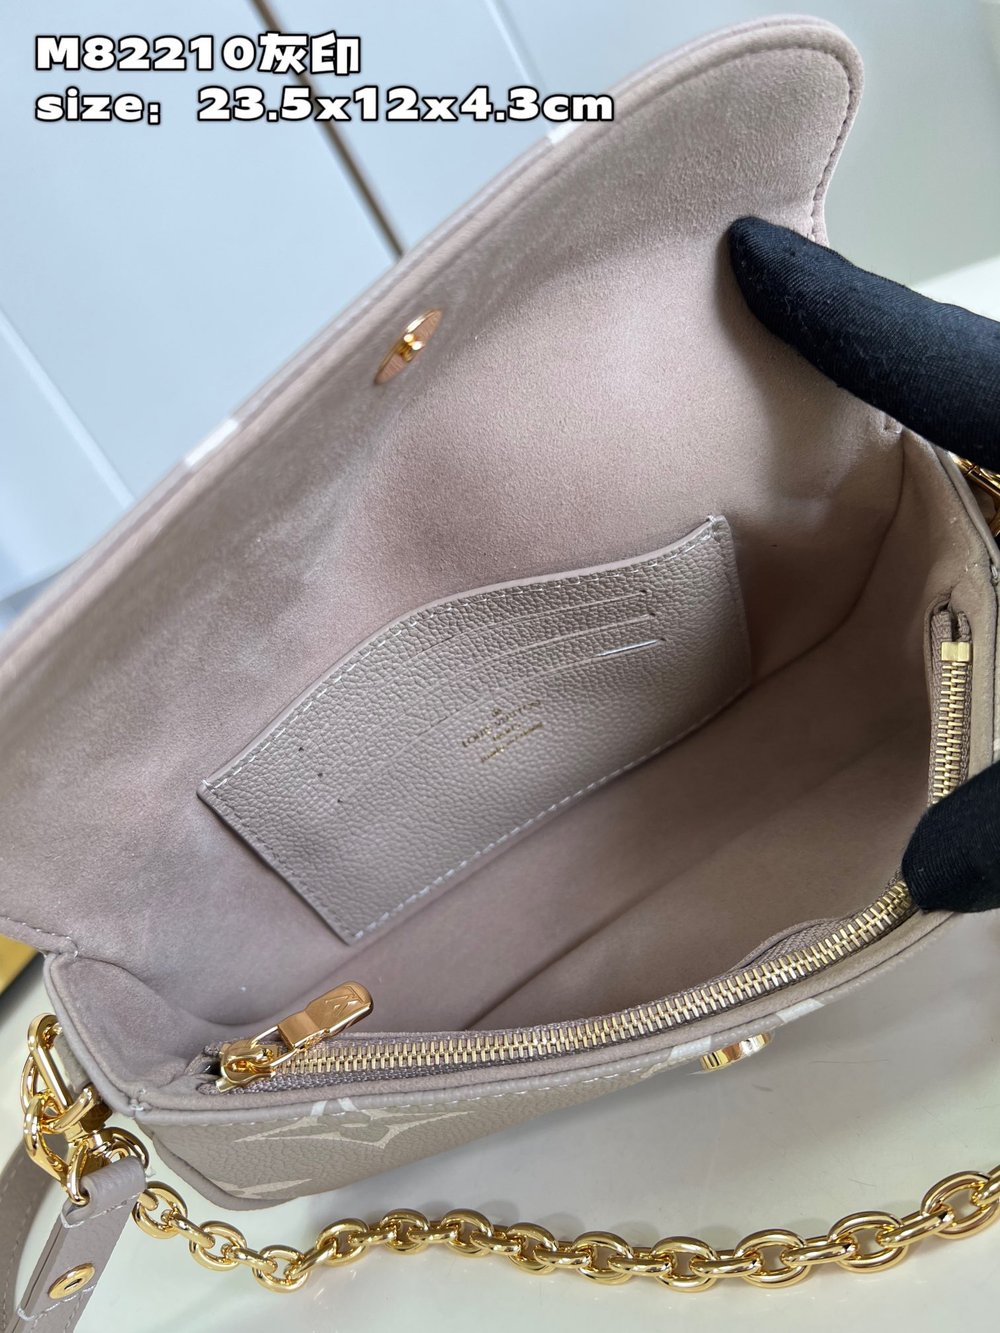 Lv bag small ivy wallet on chain｜TikTok Search